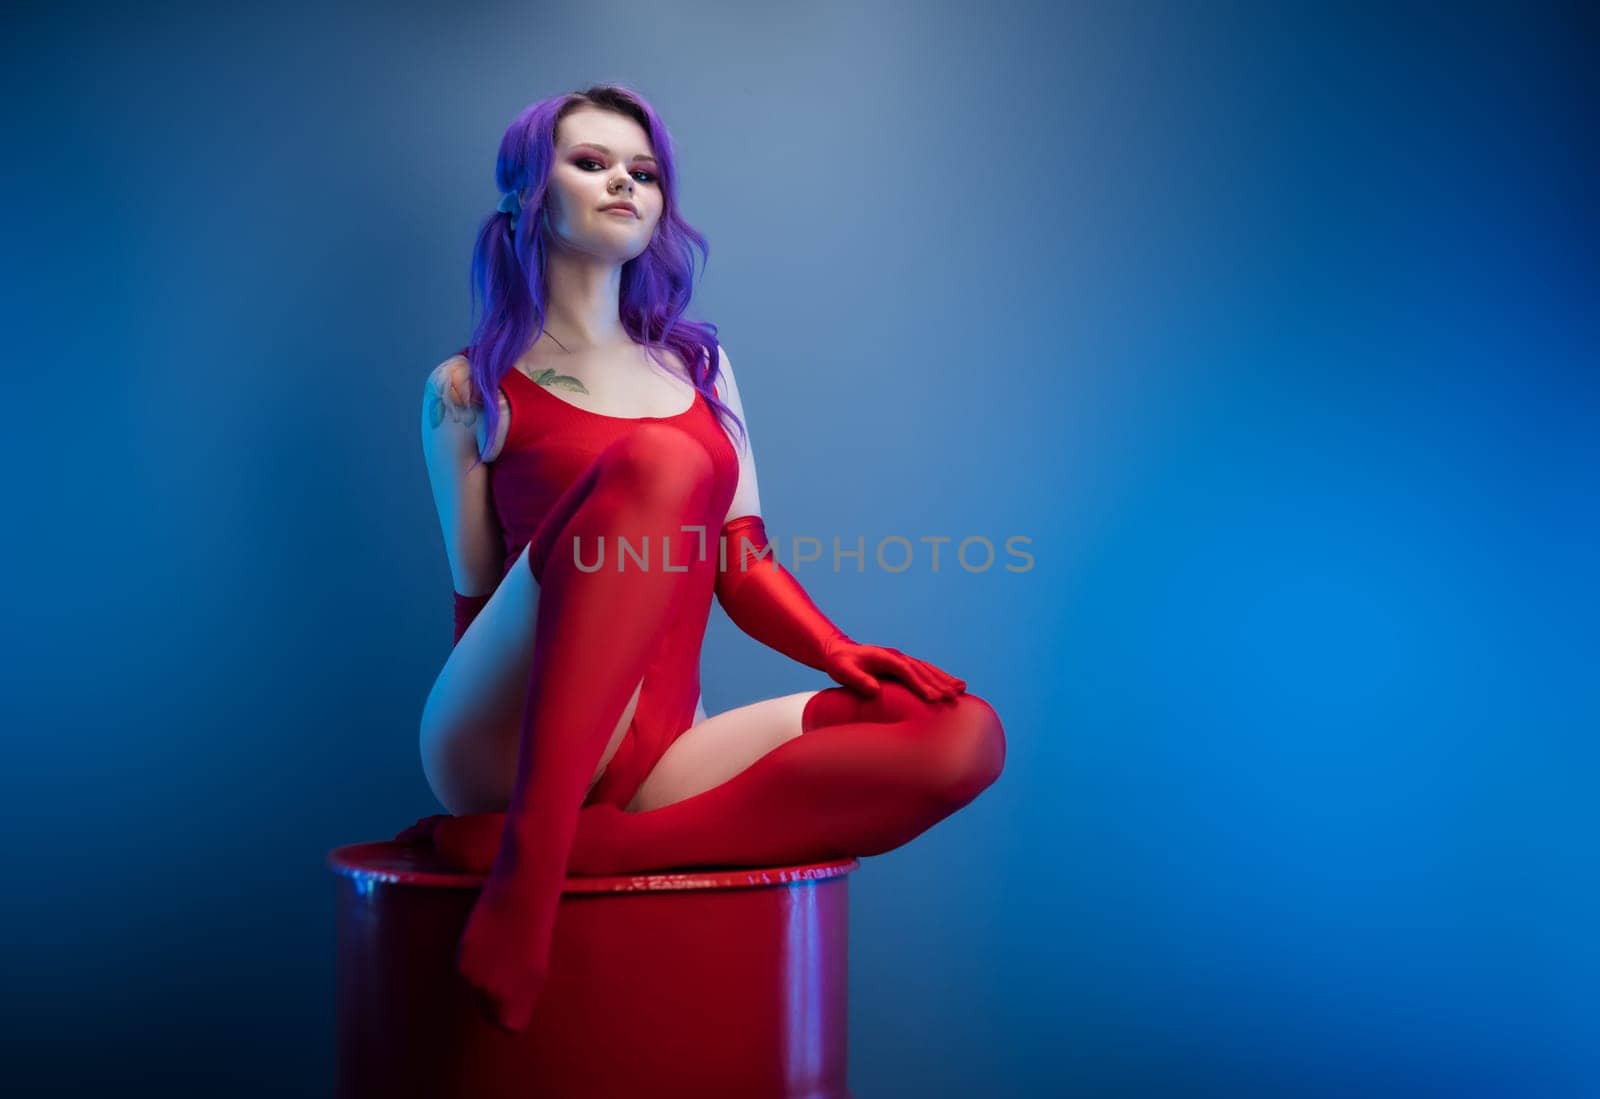 sexy girl in a red bodysuit, stockings and red gloves poses erotically on a blue background of copy paste